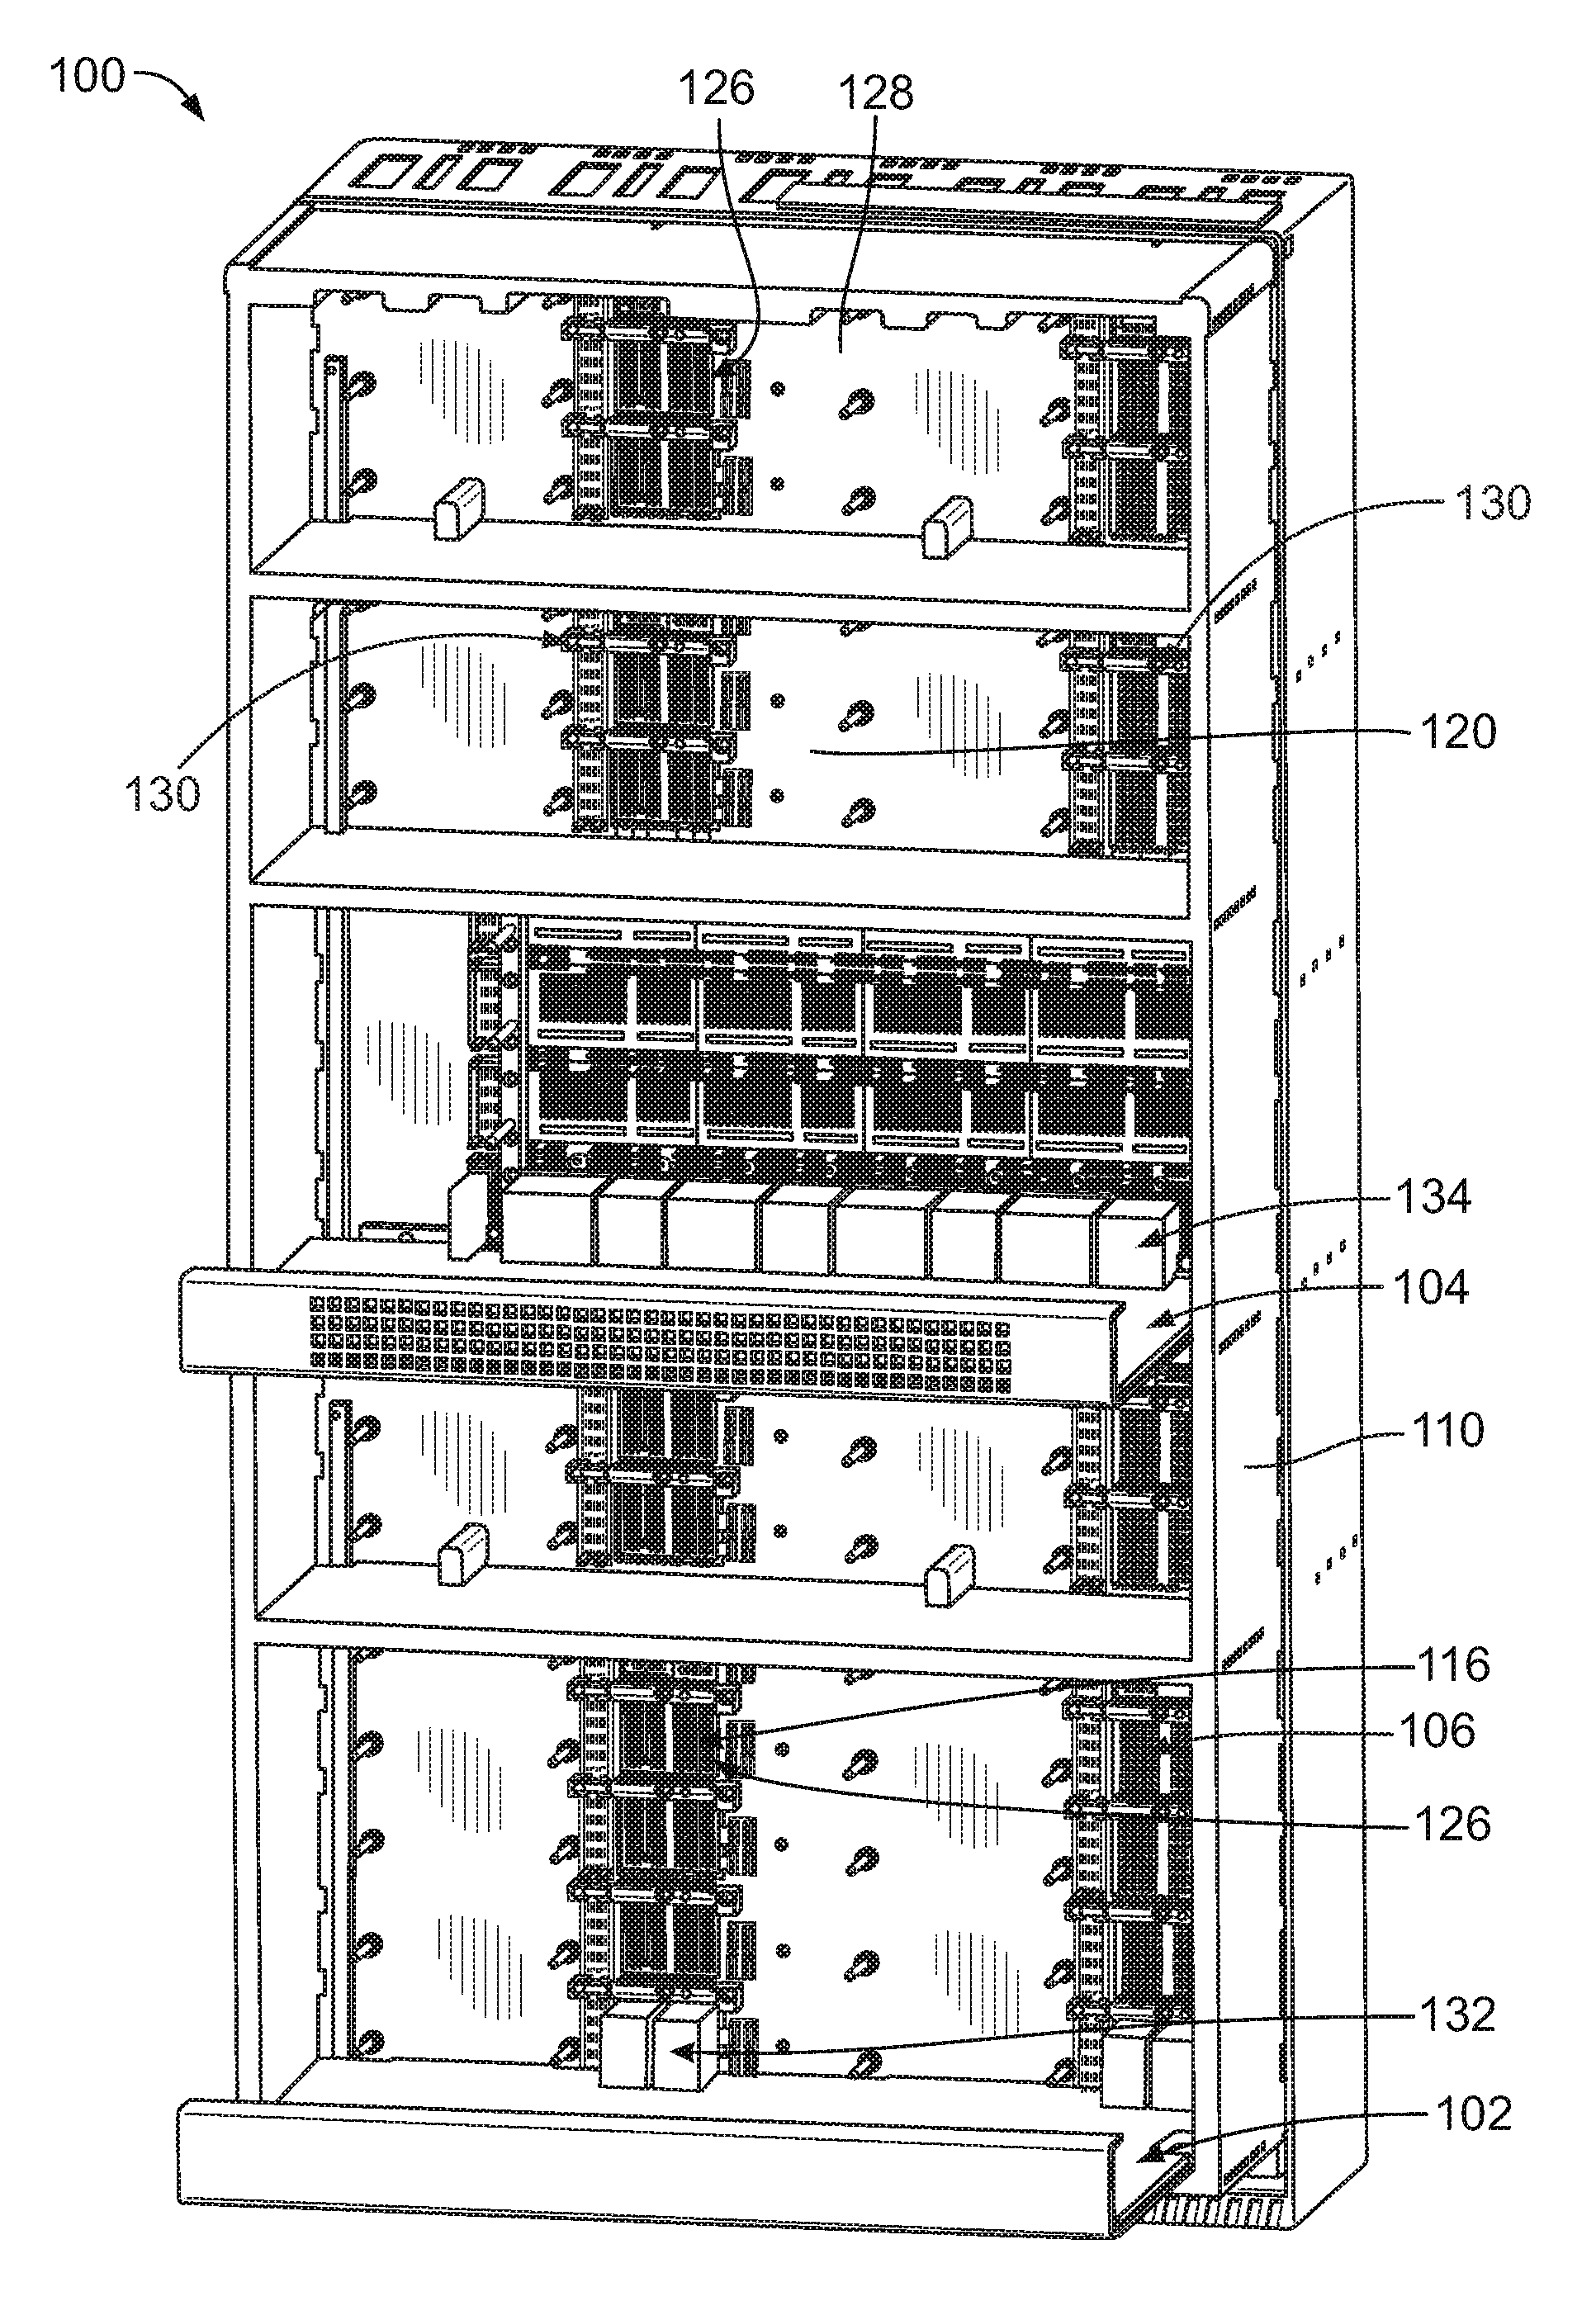 Cable backplane system having mounting blocks